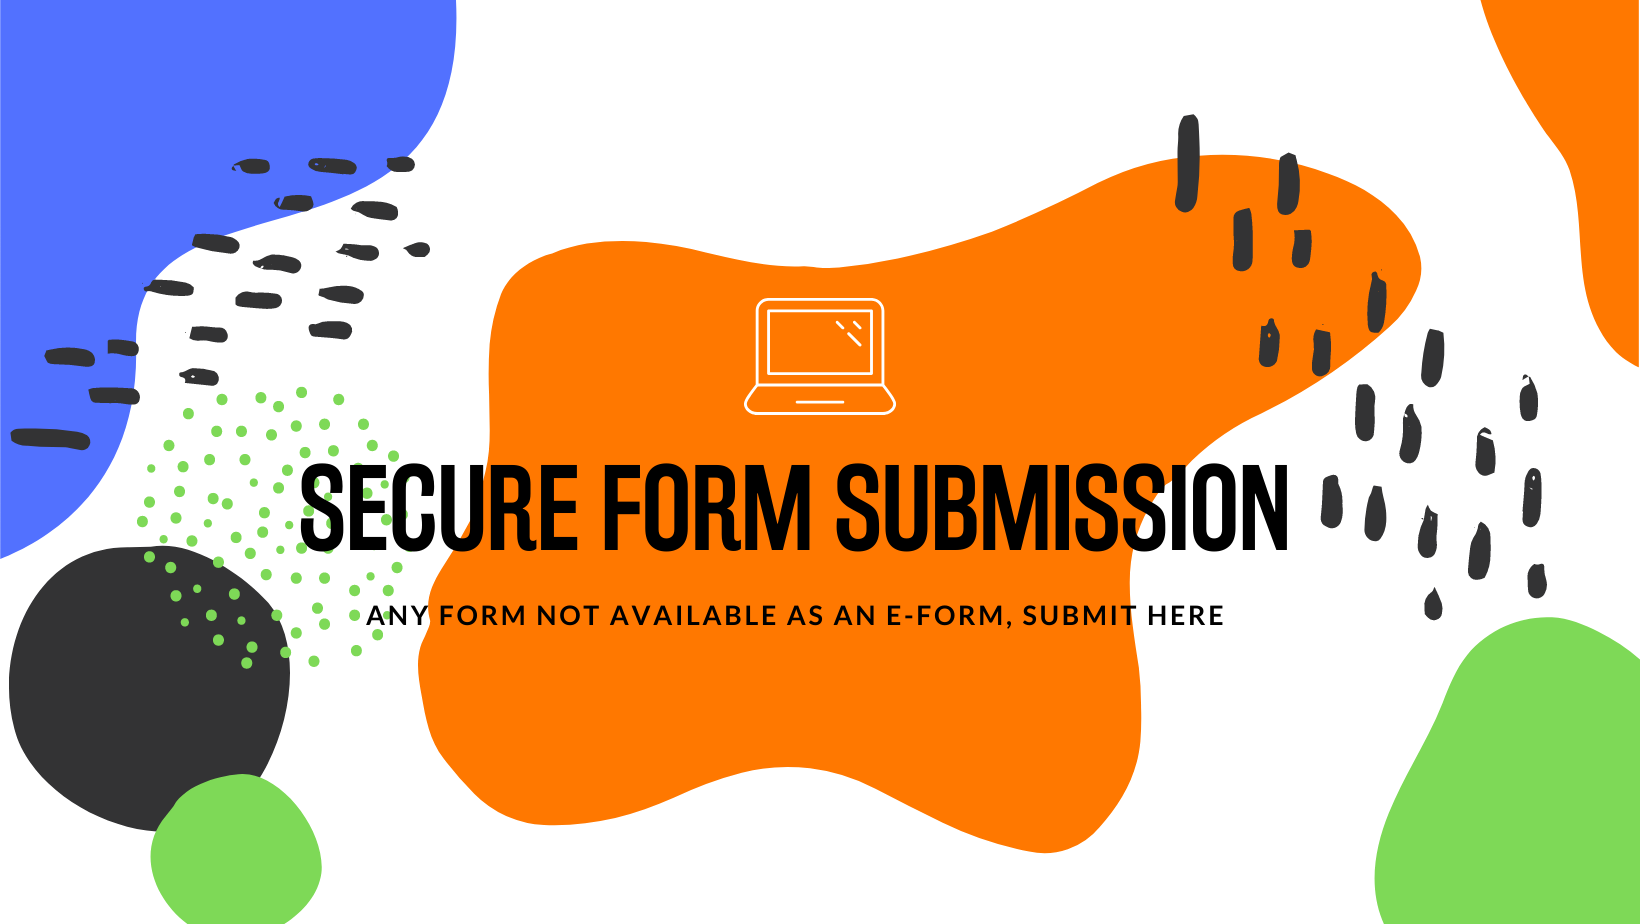 Secure Form Submission, any form not available as an e-form, submit here